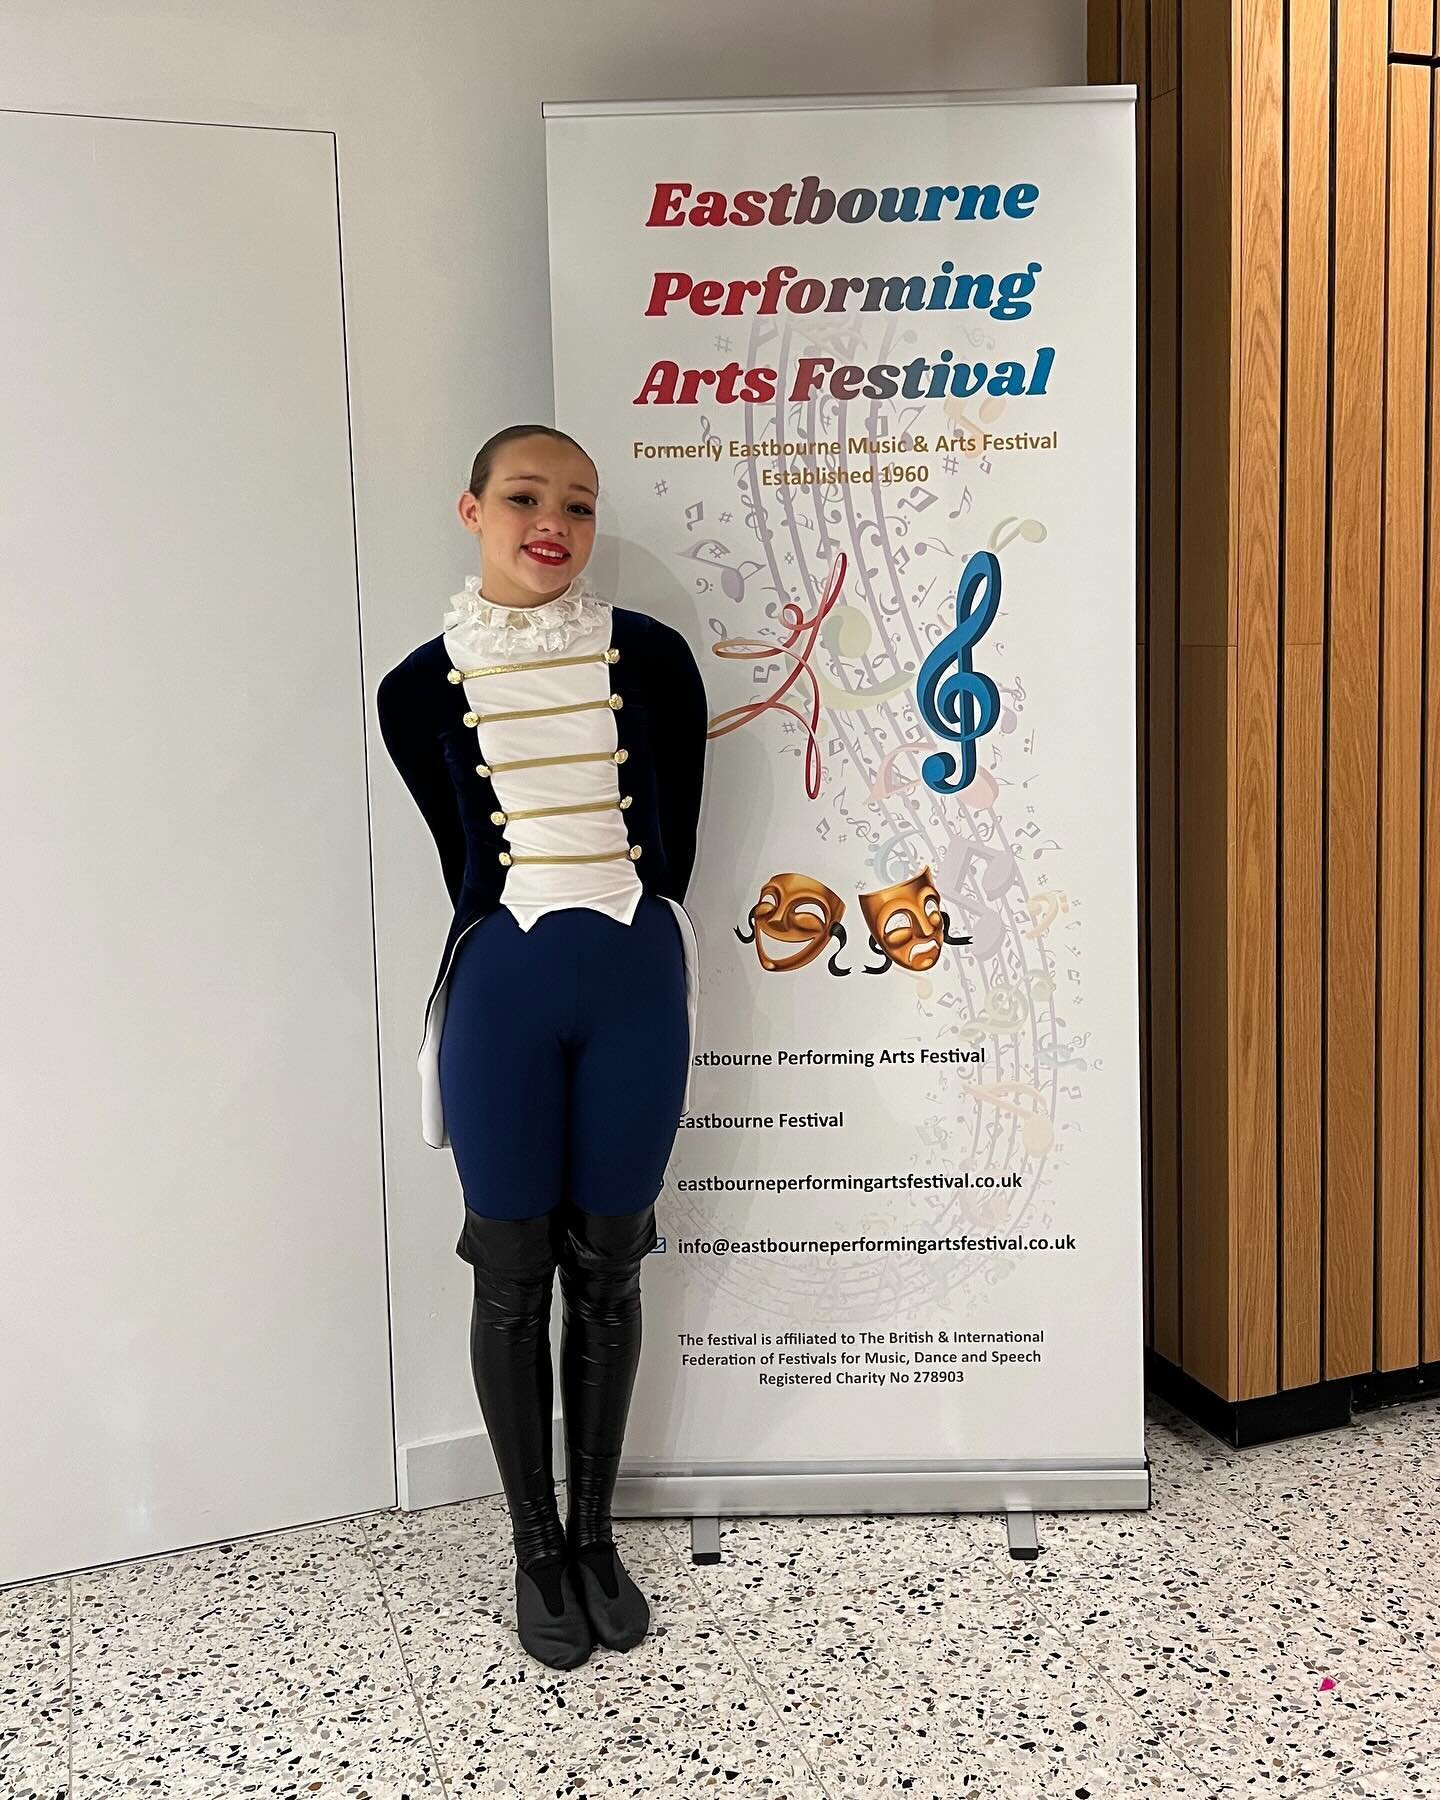 Congratulations to Ella for coming 4th and qualifying for @allenglanddance regionals with her jazz solo in a very strong section at Eastbourne festival! 🎉🏅

And congratulations also to Sophia for also coming 4th with her ballet solo. 🩰🌟

We&rsquo